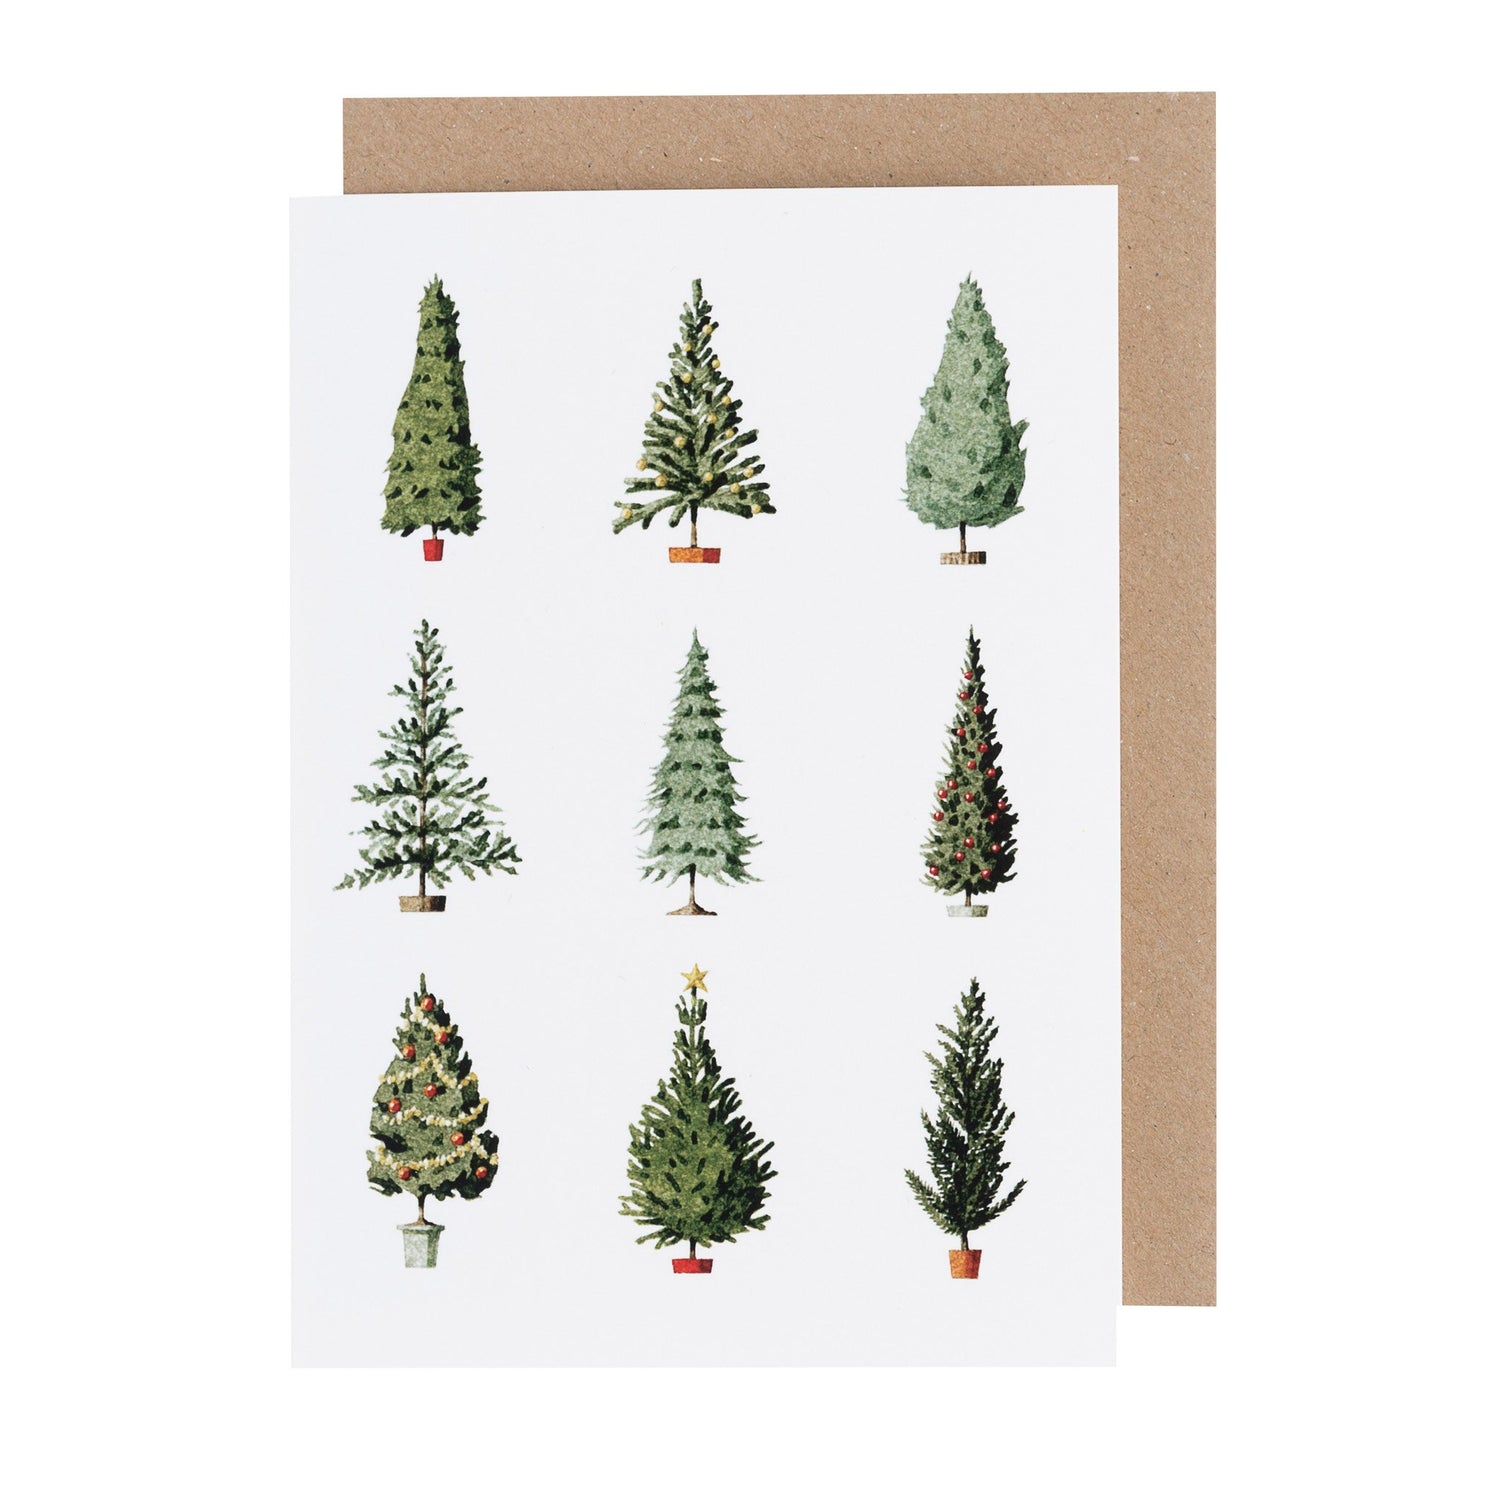 environmentally sustainable paper, compostable packaging, recycled paper, made in england, illustration, christmas trees, christmas